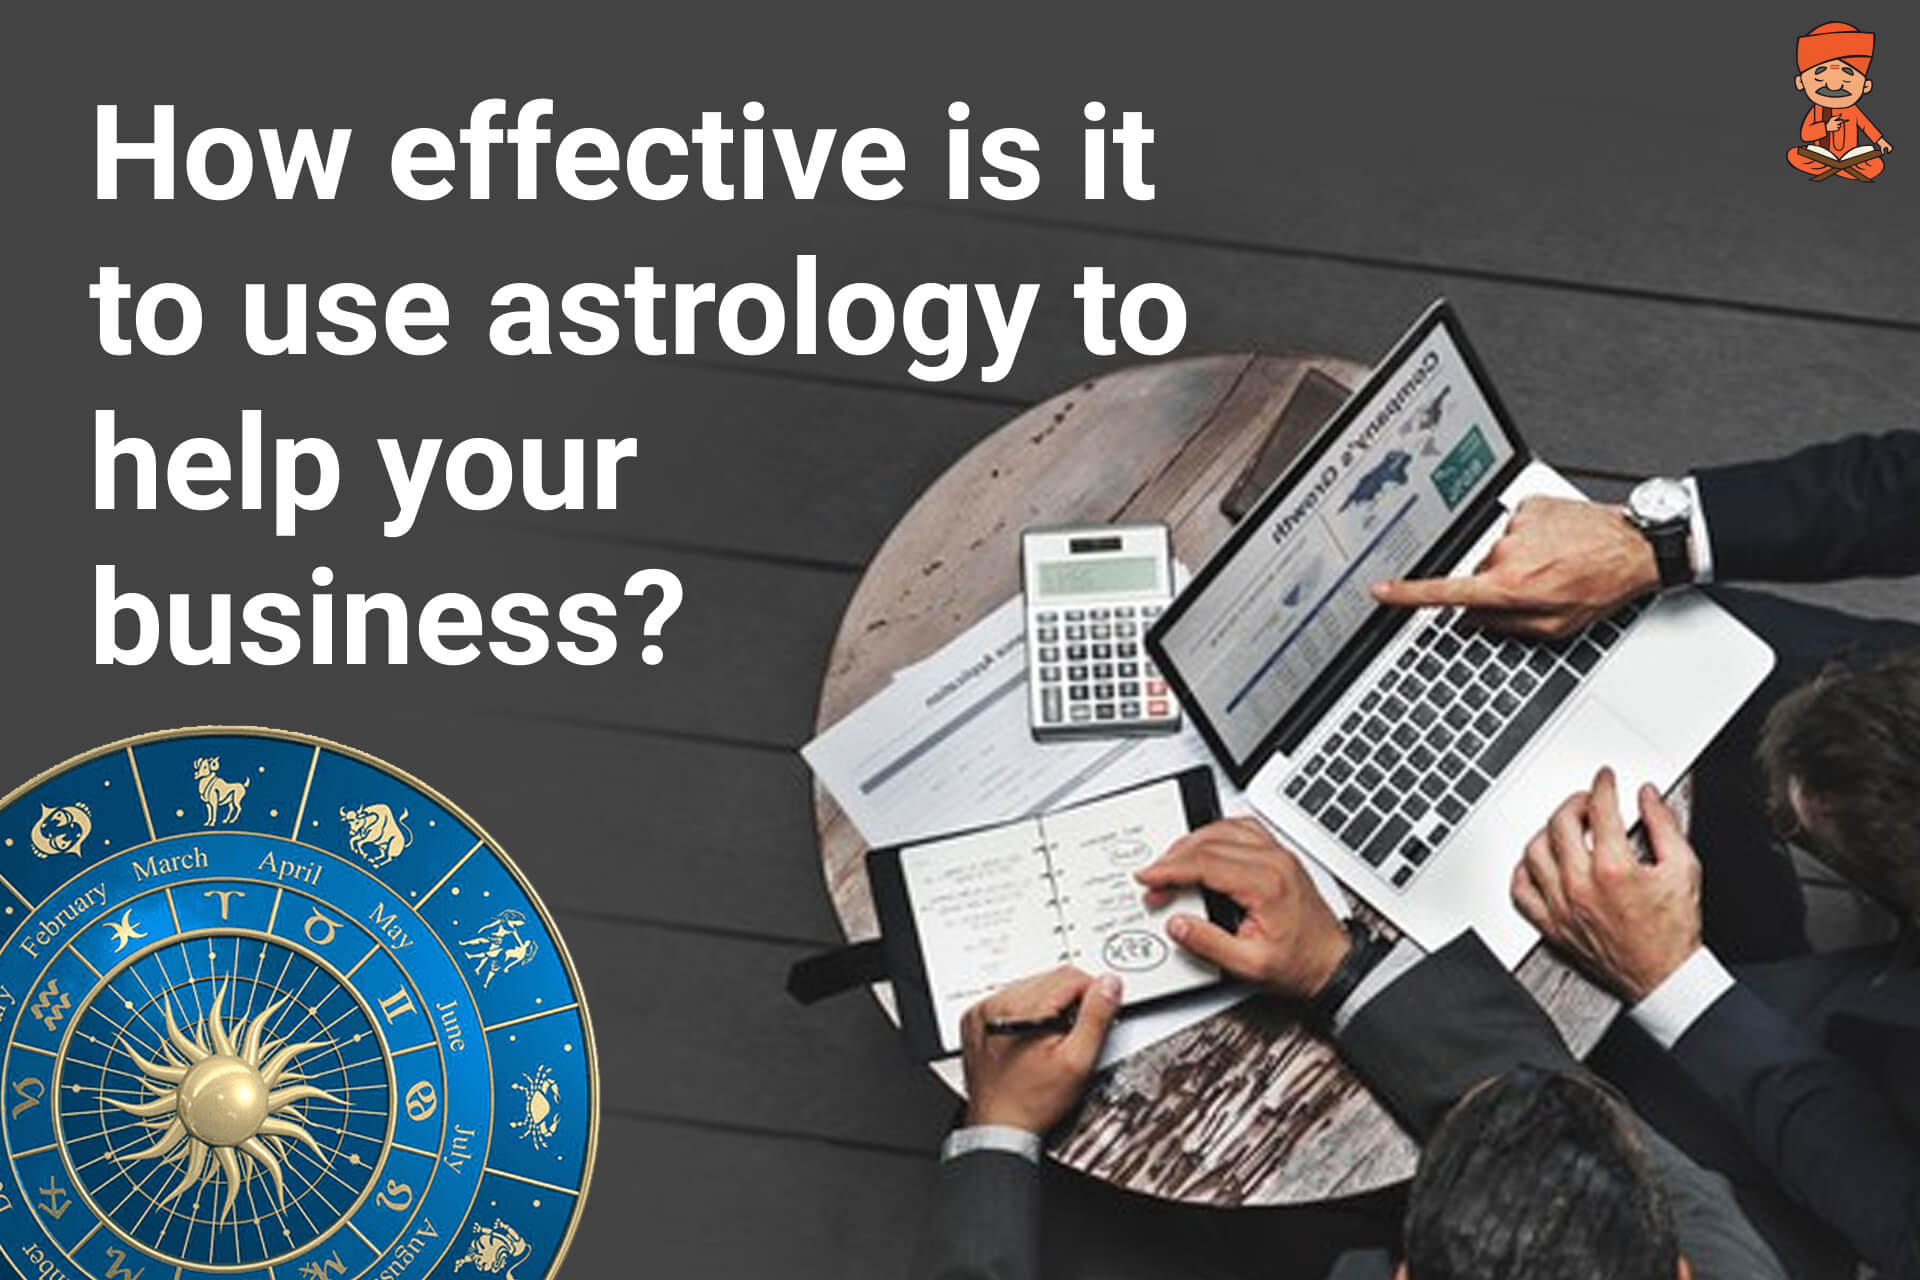 How Effective is It to Use Astrology to Help Your Business?